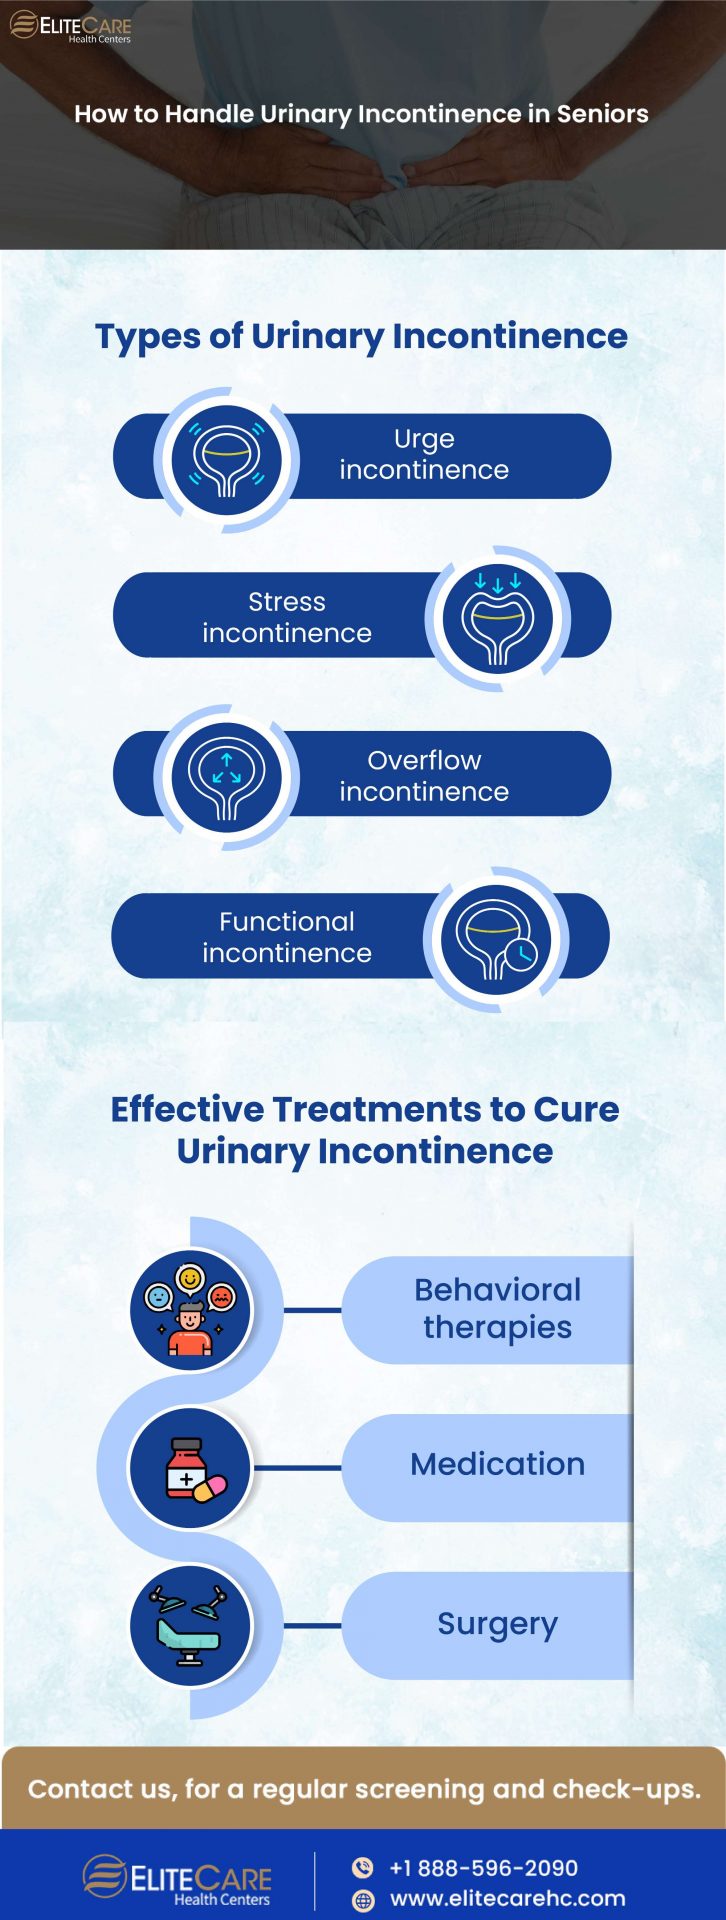 How to Handle Urinary Incontinence in Seniors | Infographic